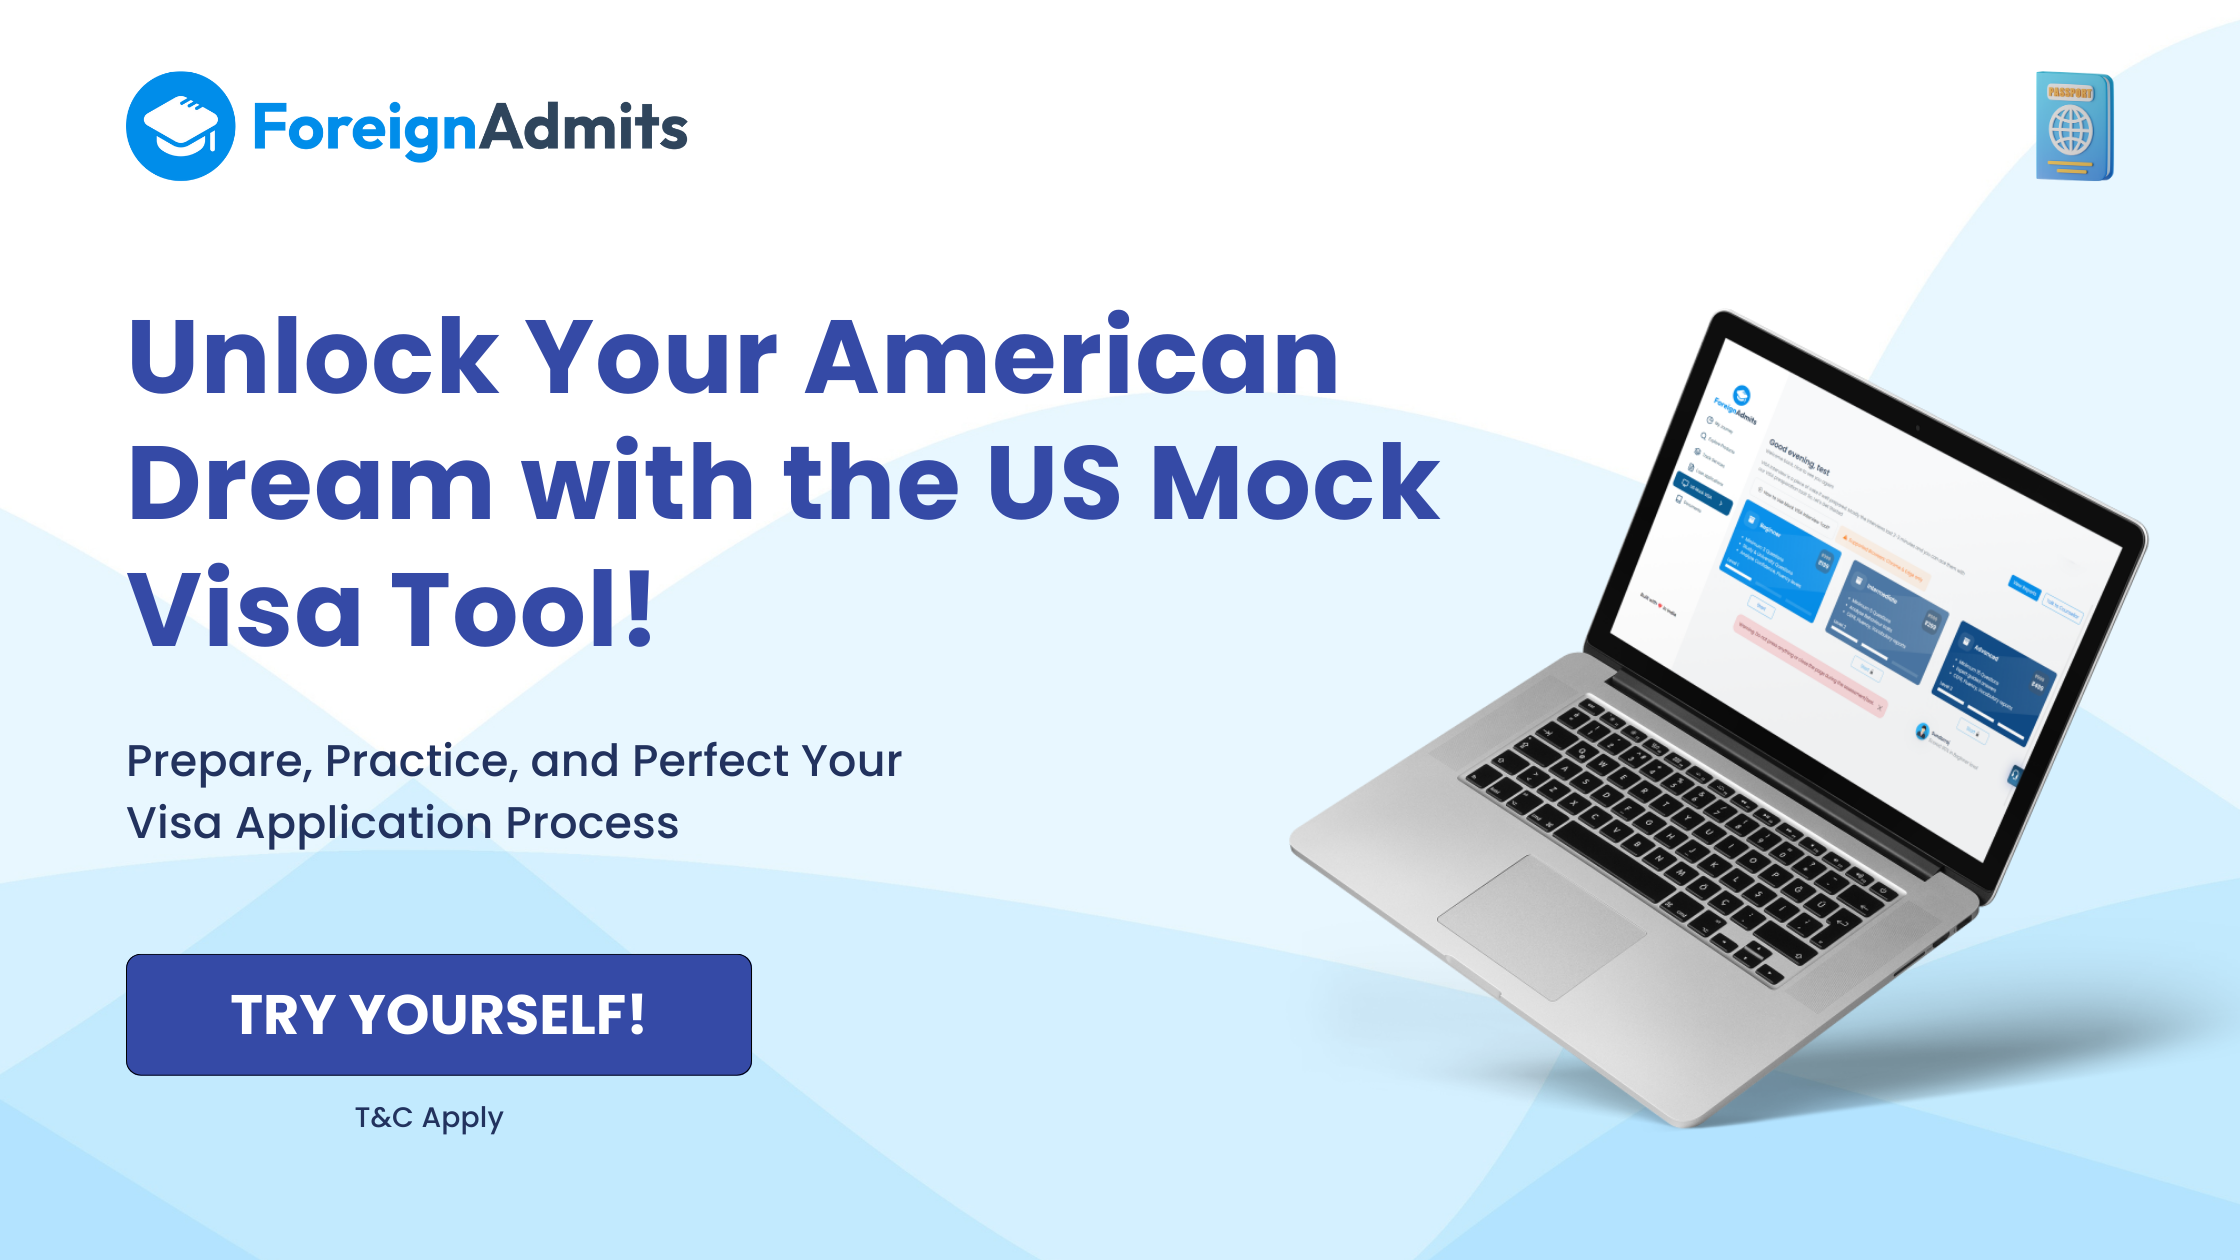 US Mock Visa by ForeignAdmits